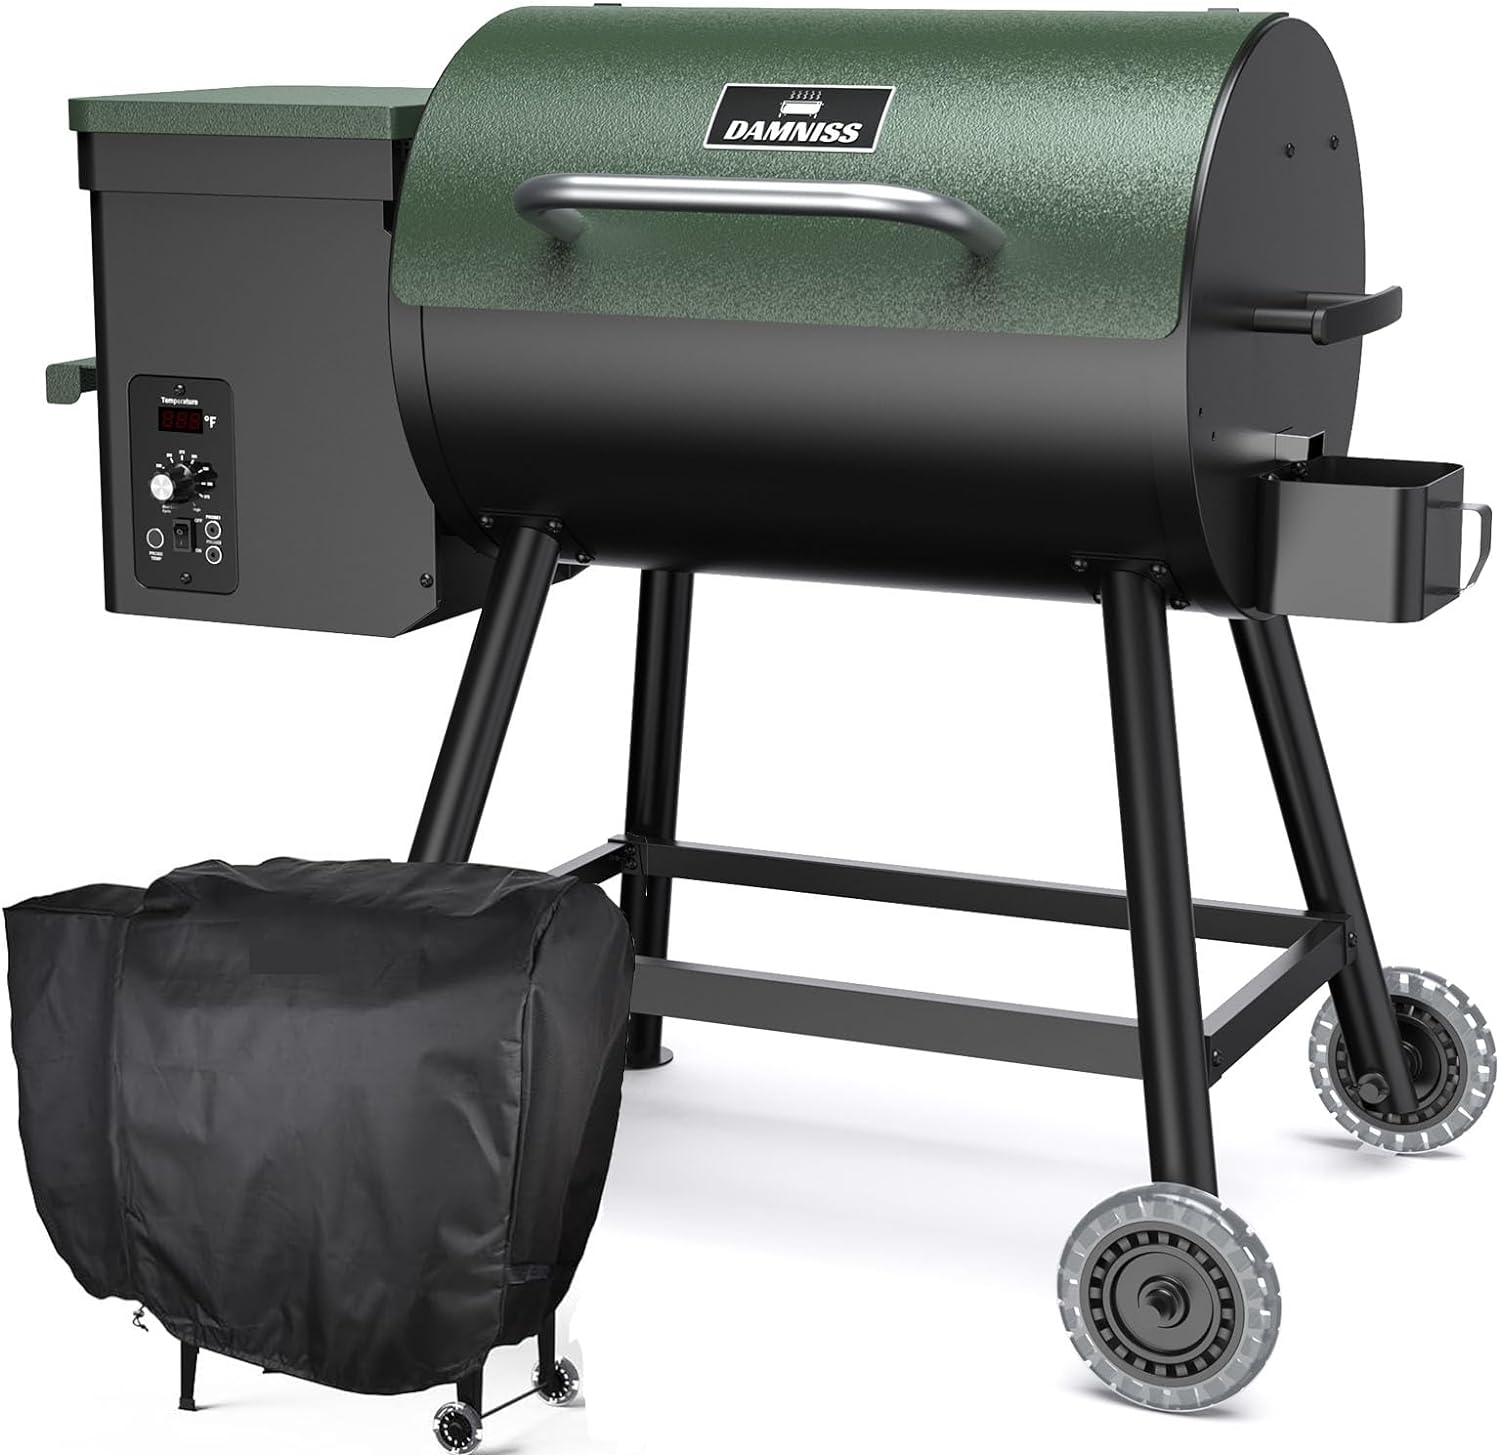 DAMNISS Wood Pellet Grill Review